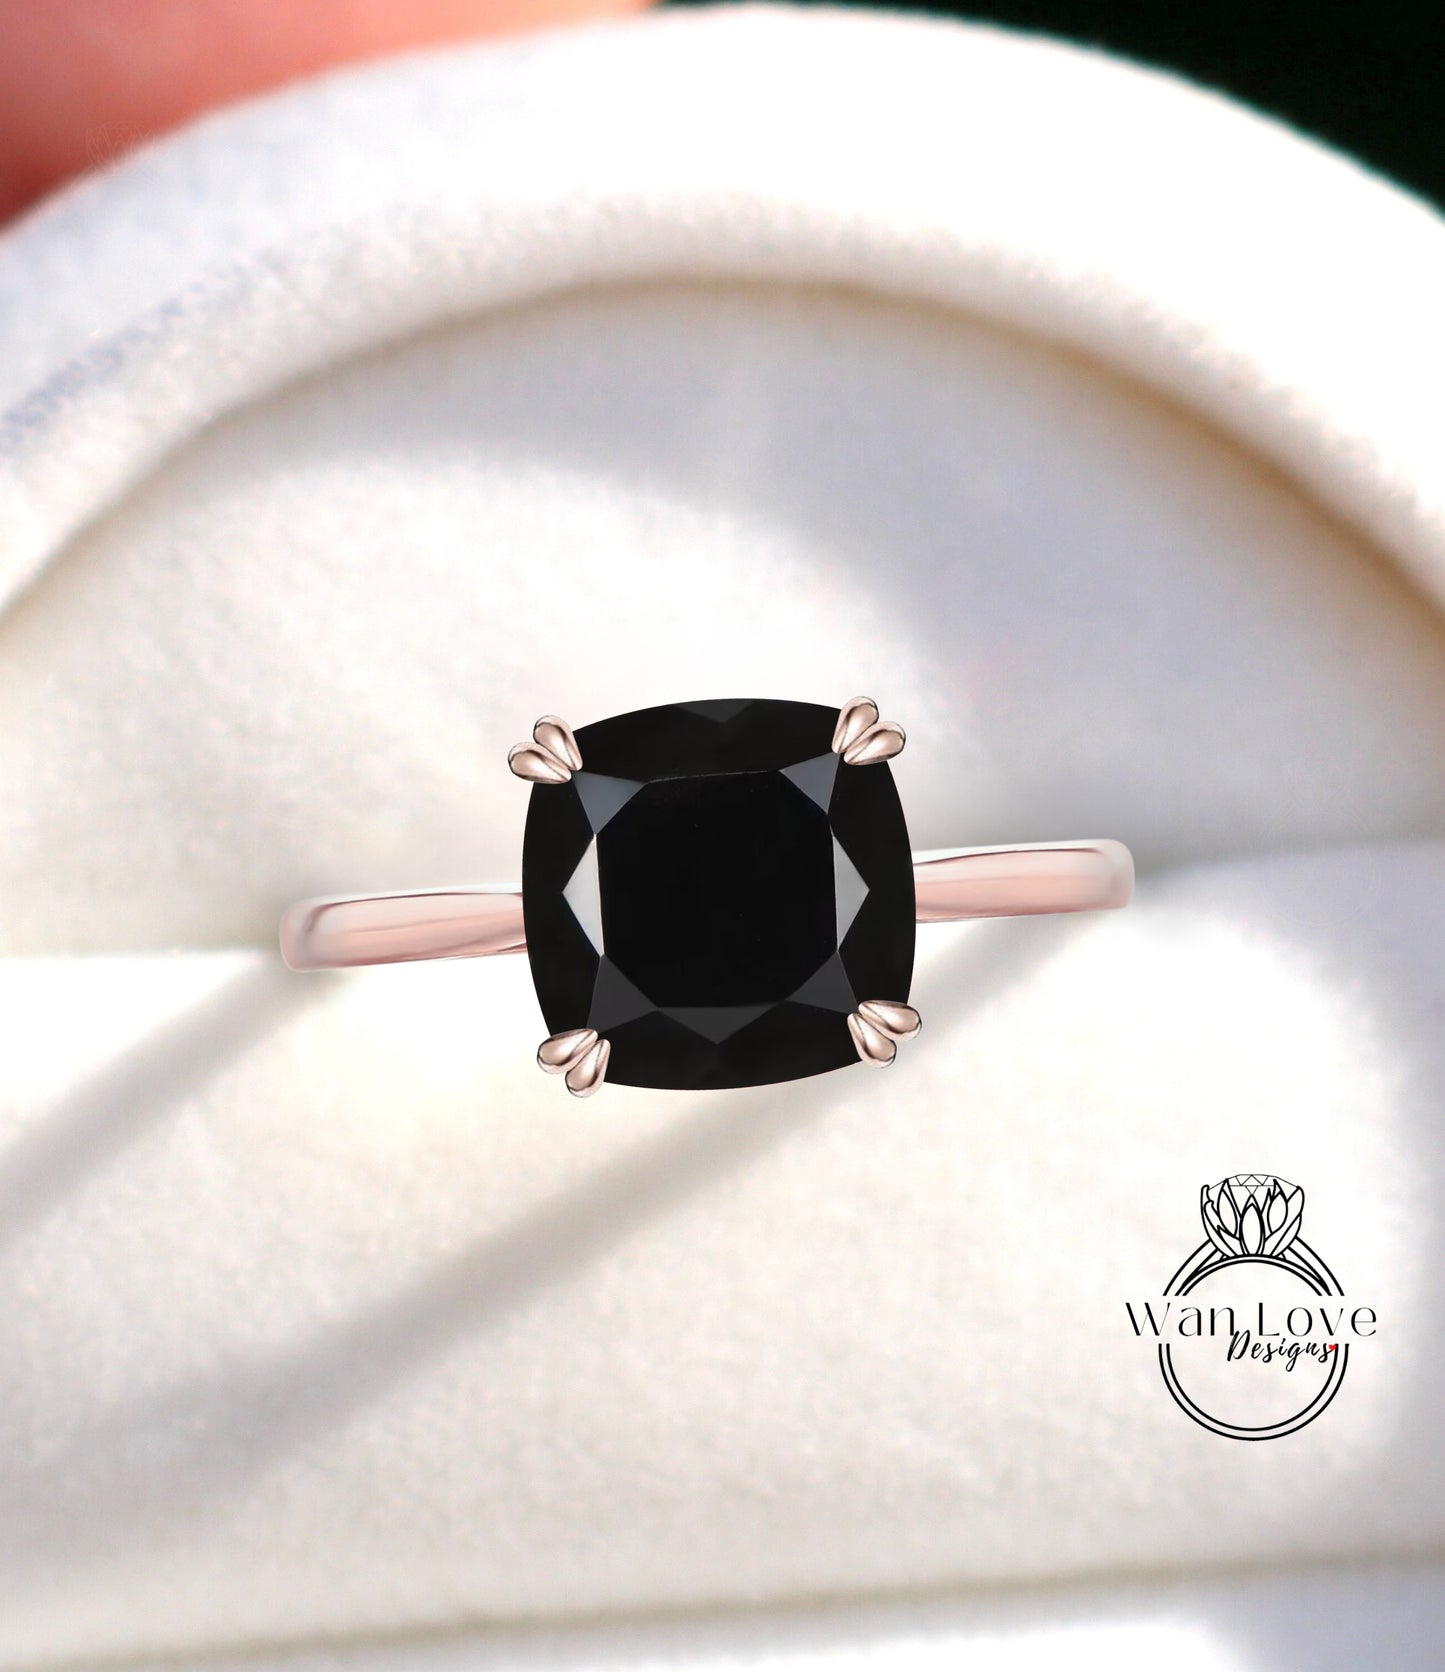 Black Spinel Solitaire Cushion Engagement Ring, 14k 18k White Yellow Rose Gold,Platinum, Custom made size,Wedding,Anniversary,WanLoveDesigns